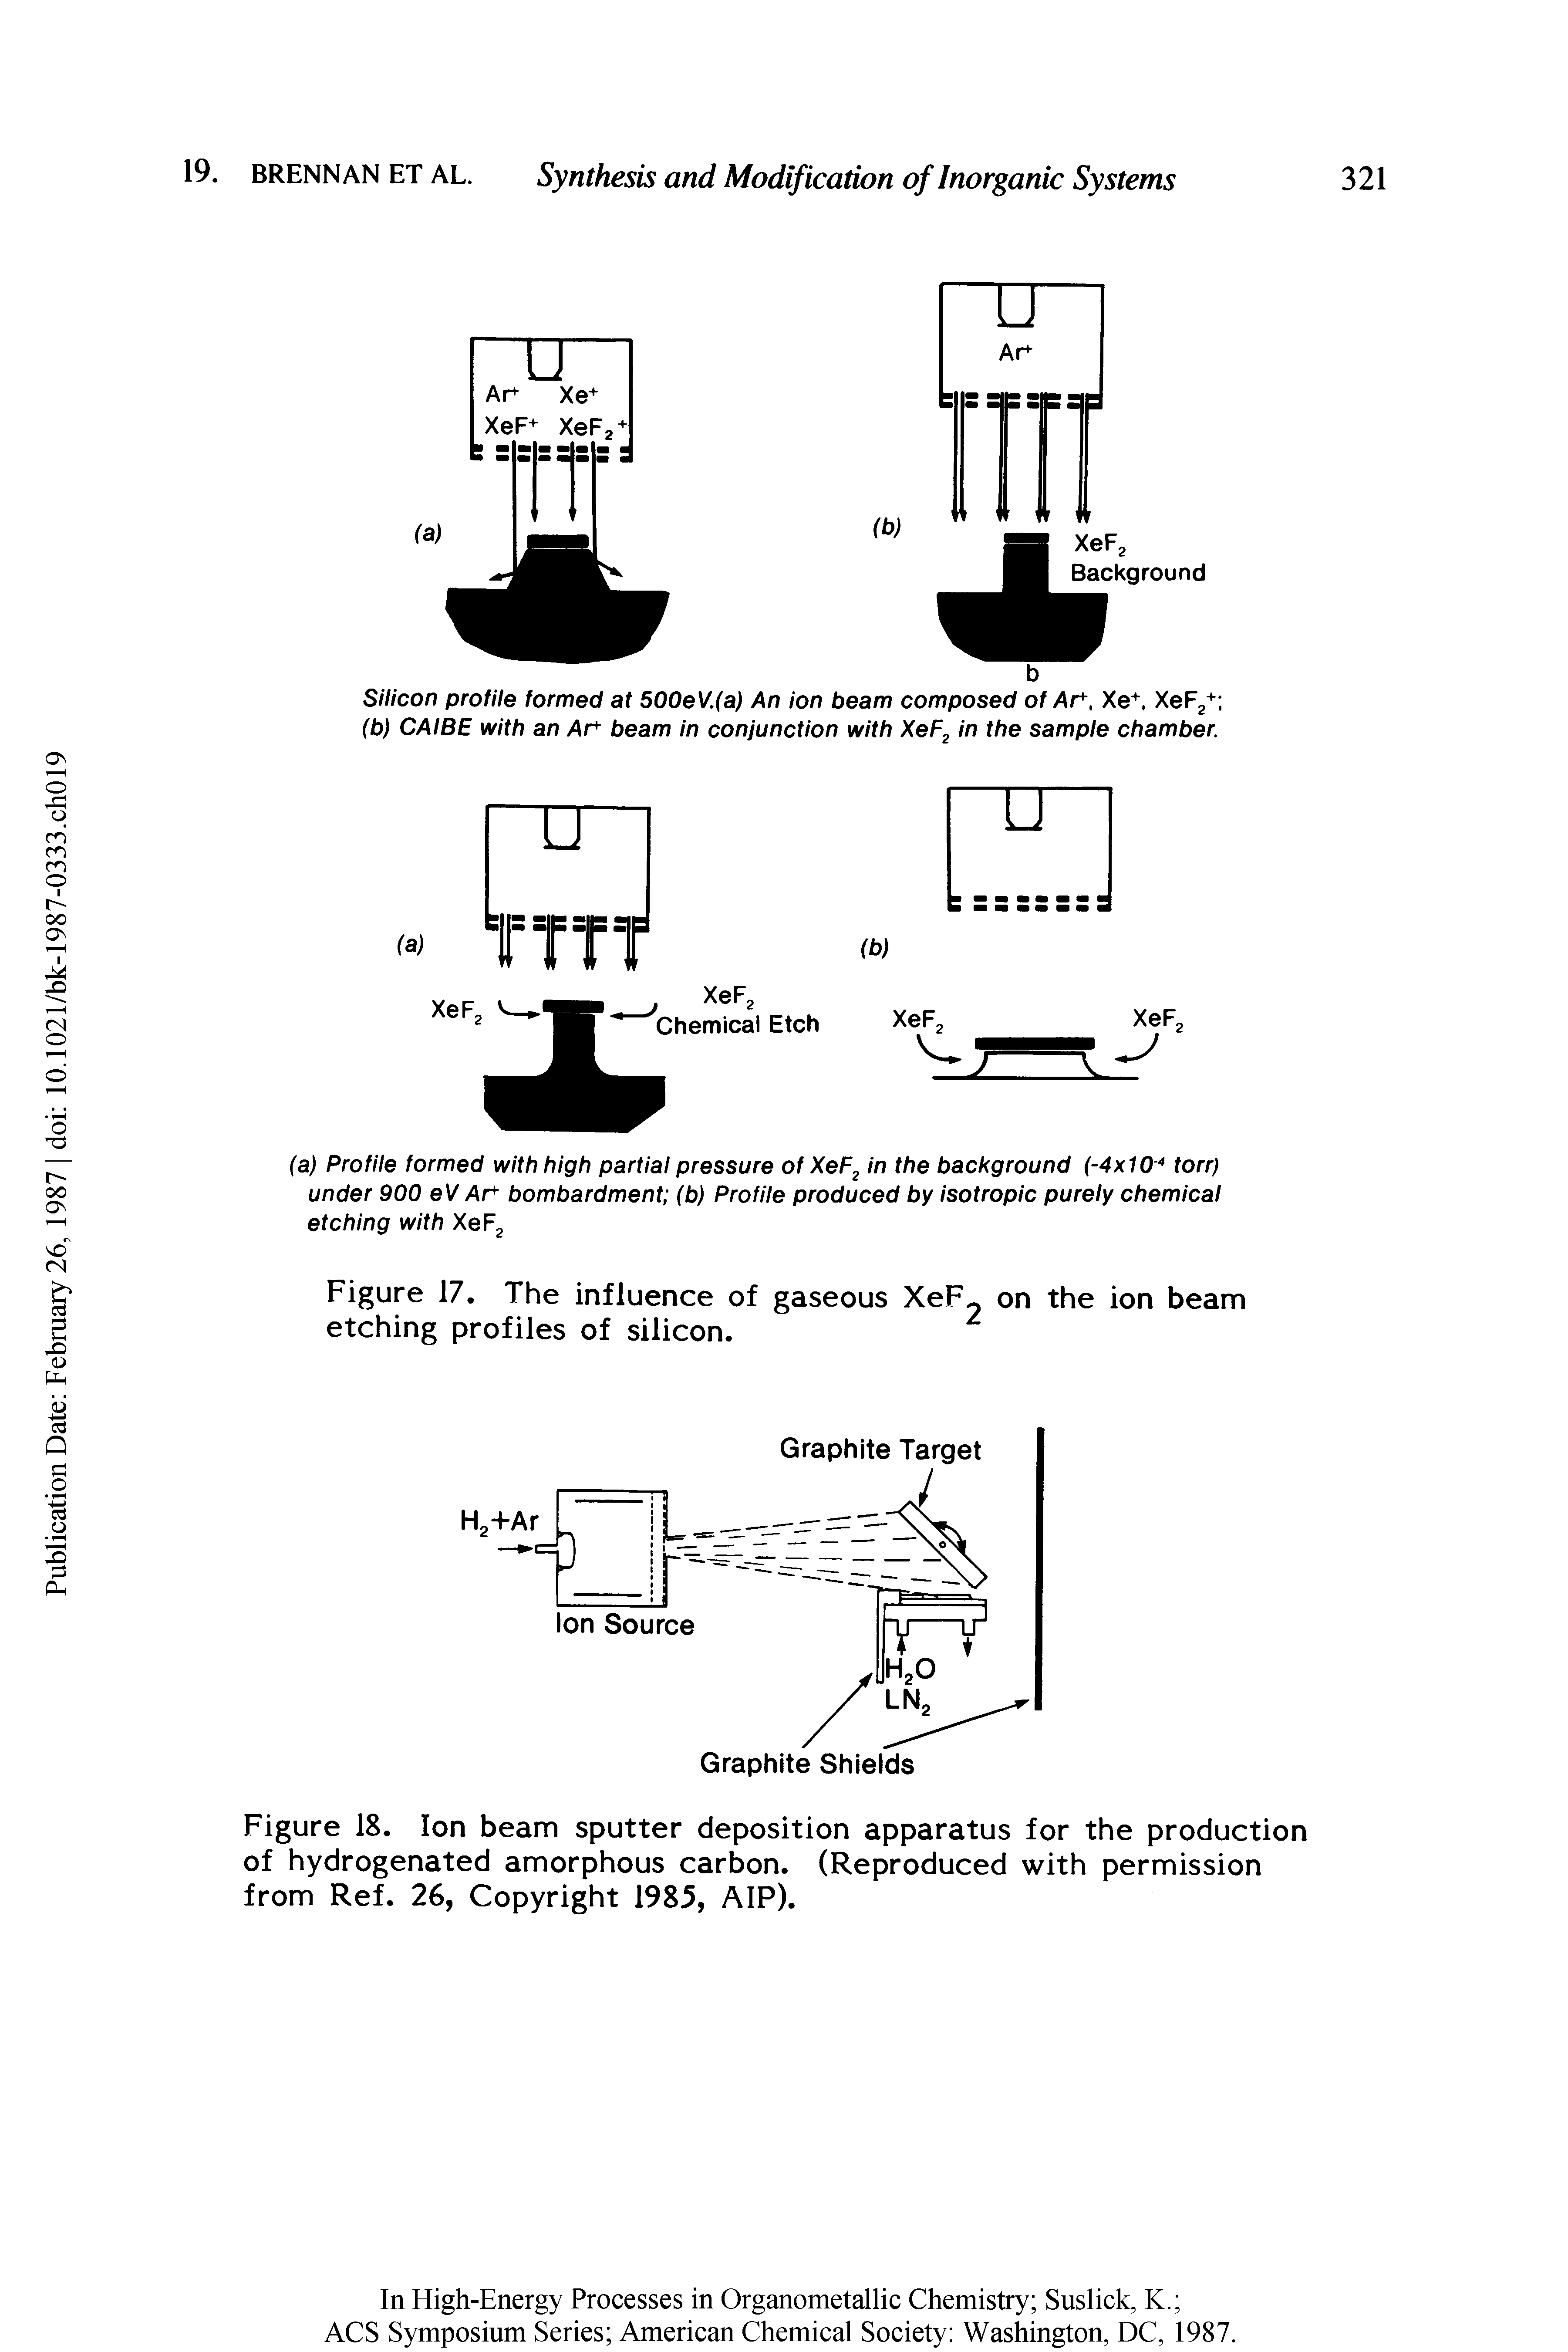 Figure 18. Ion beam sputter deposition apparatus for the production of hydrogenated amorphous carbon. (Reproduced with permission from Ref. 26, Copyright 1985, AIP).